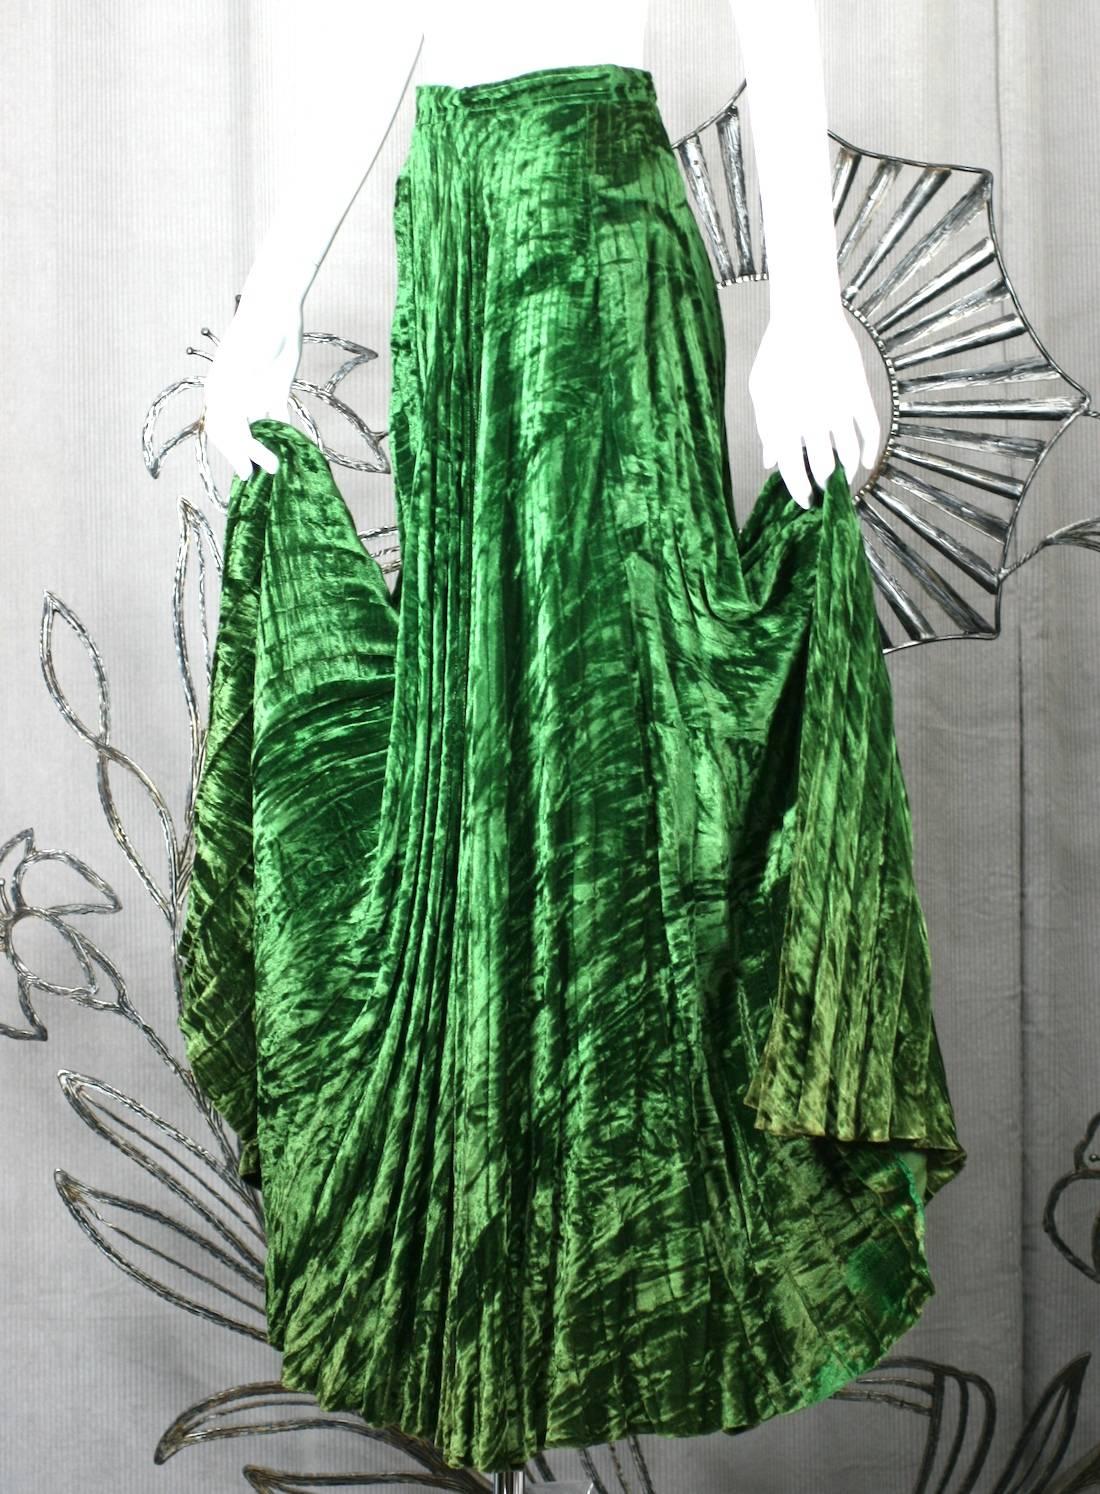 Early Yves Saint Laurent Rive Gauche bohemian style long pleated skirt in bottle green rayon crushed panne velvet. Full circle cut. 1970's France. 
Very Good Condition, faint fading to bottom hem throughout.
Waist 25